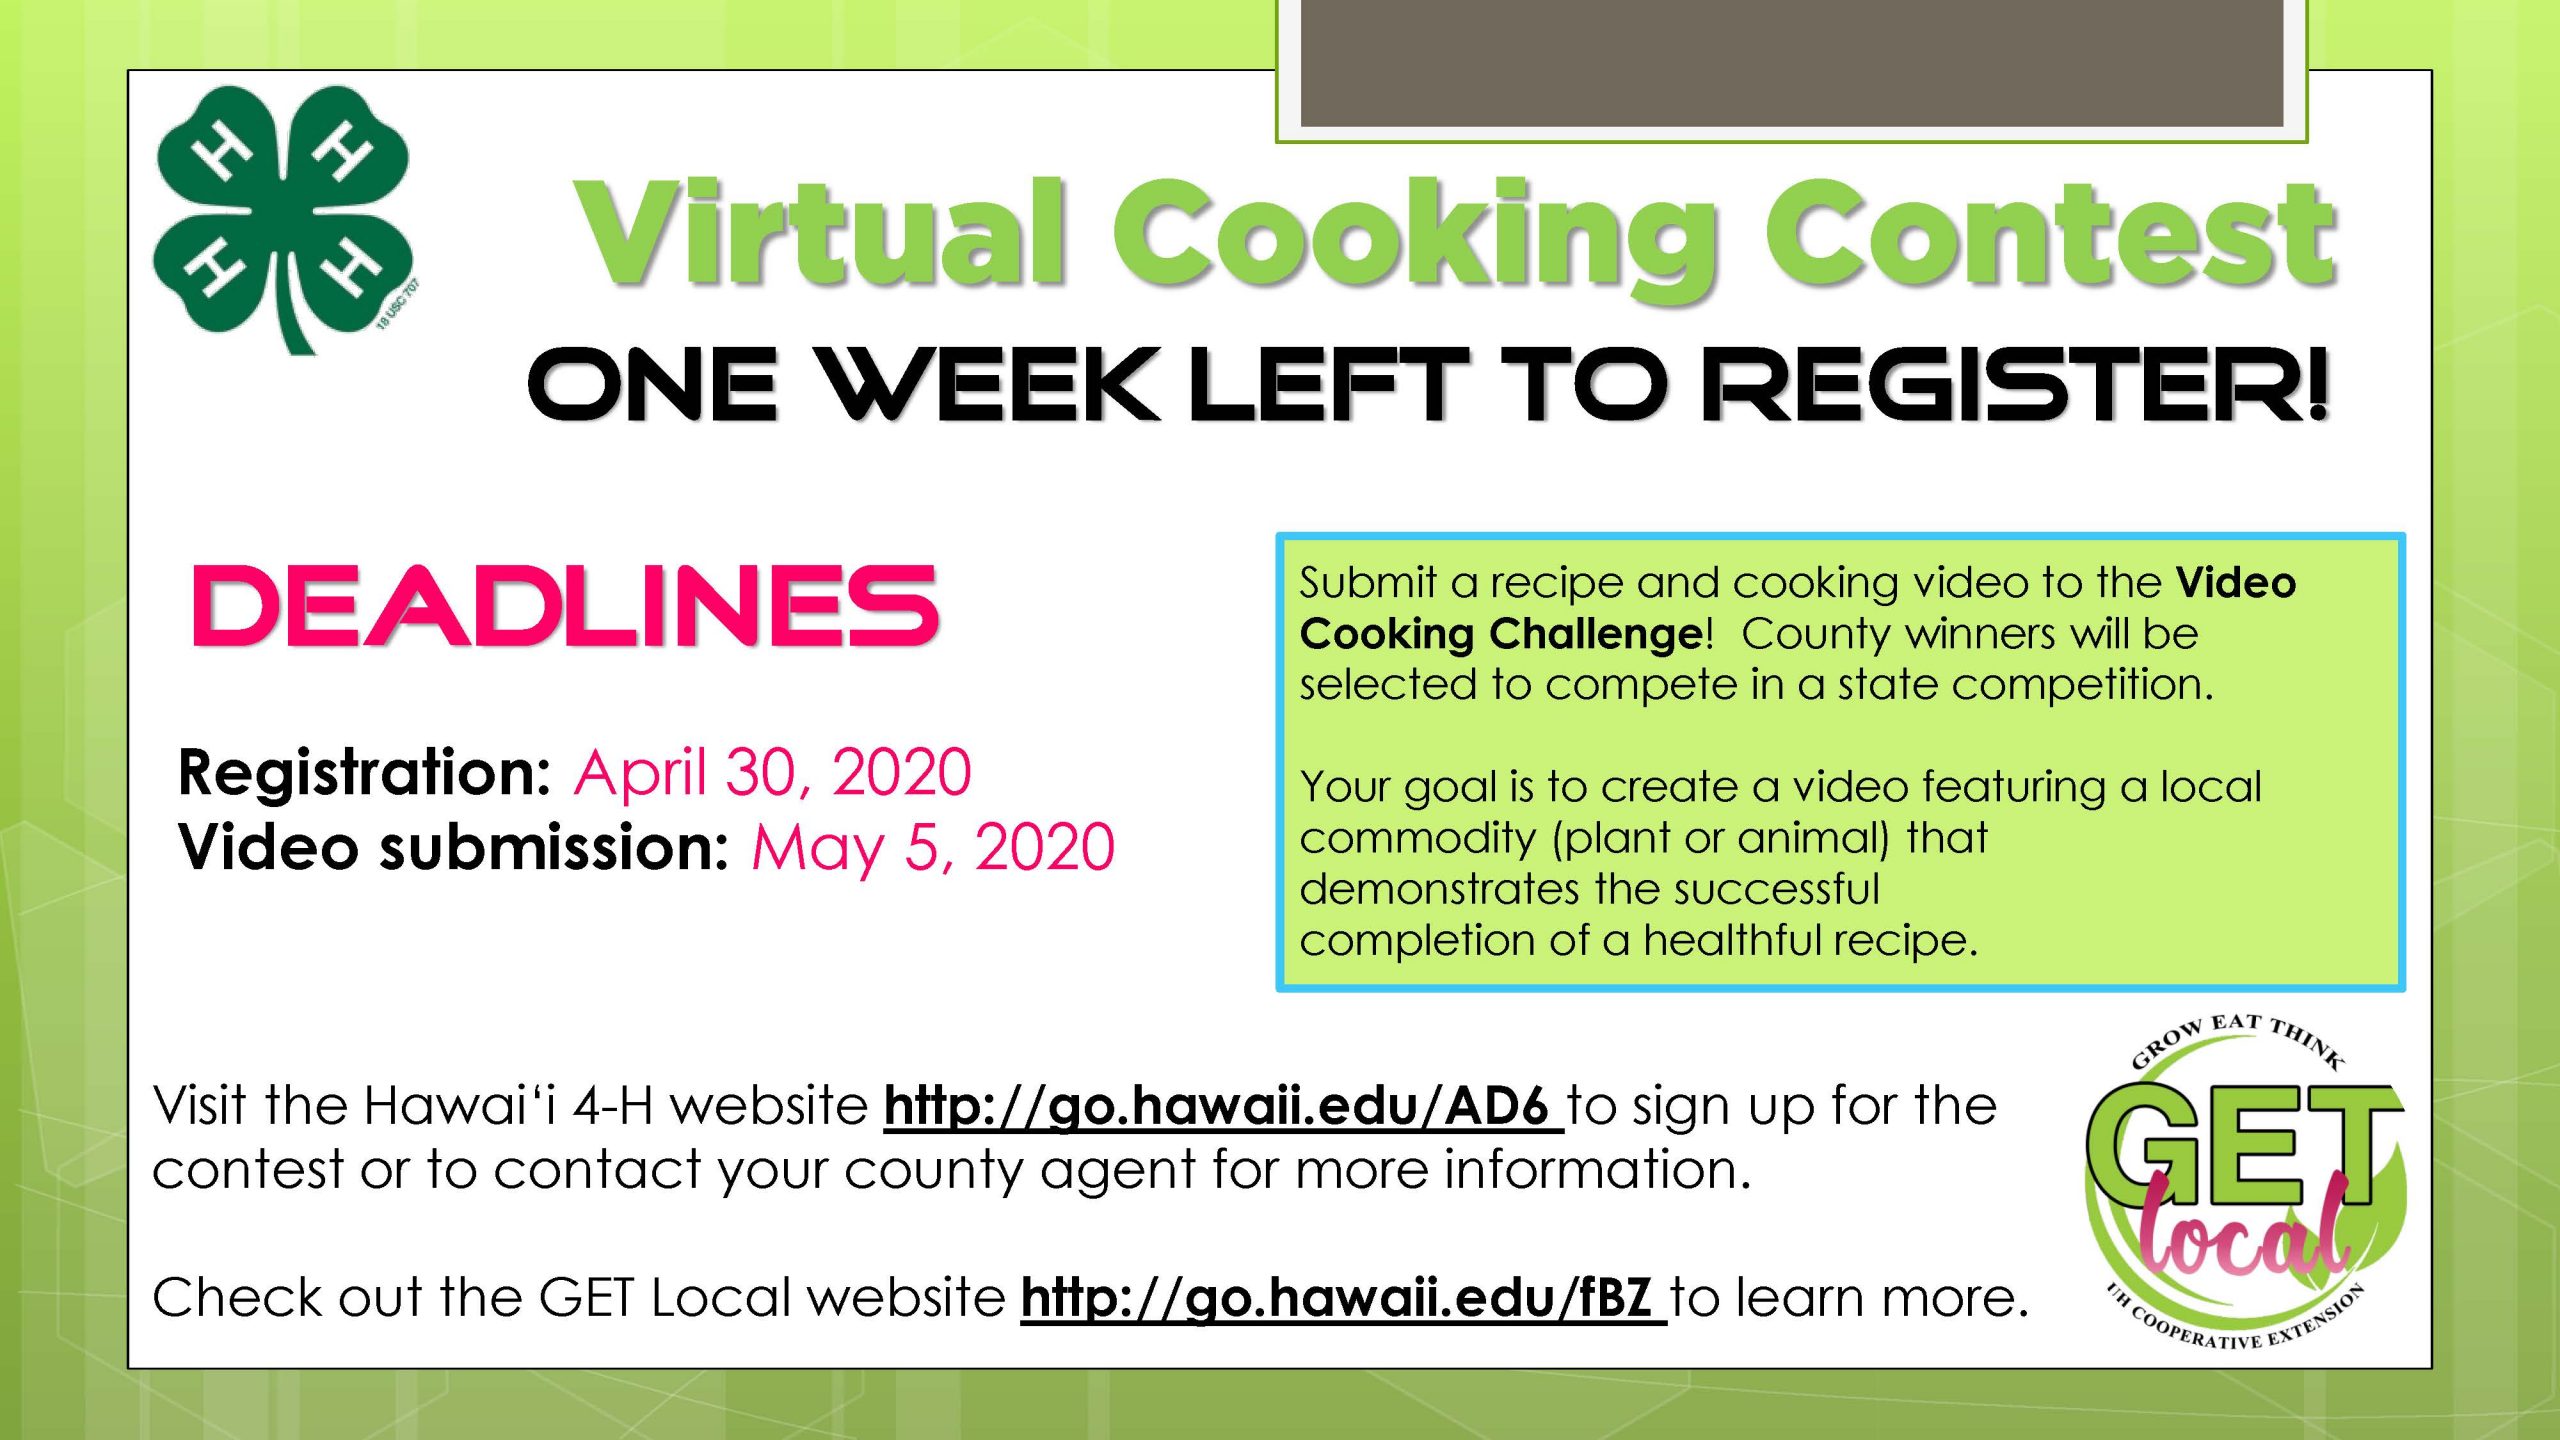 contest flyer with exteded registration deadline to april 30, 2020